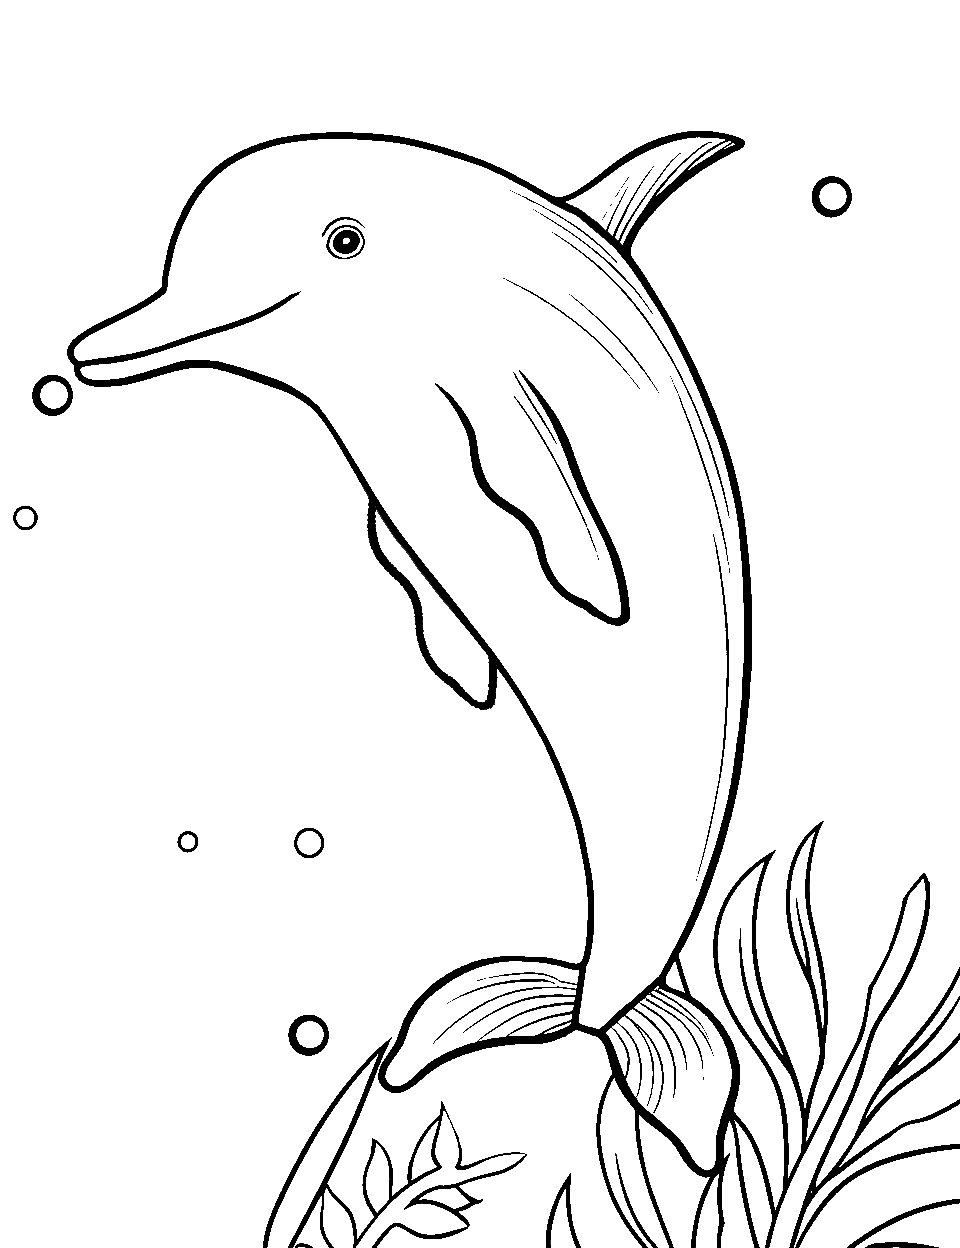 Easy to Color Dolphin in the Deep Coloring Page - An easy-to-color dolphin gently striking a pose in the deep ocean.